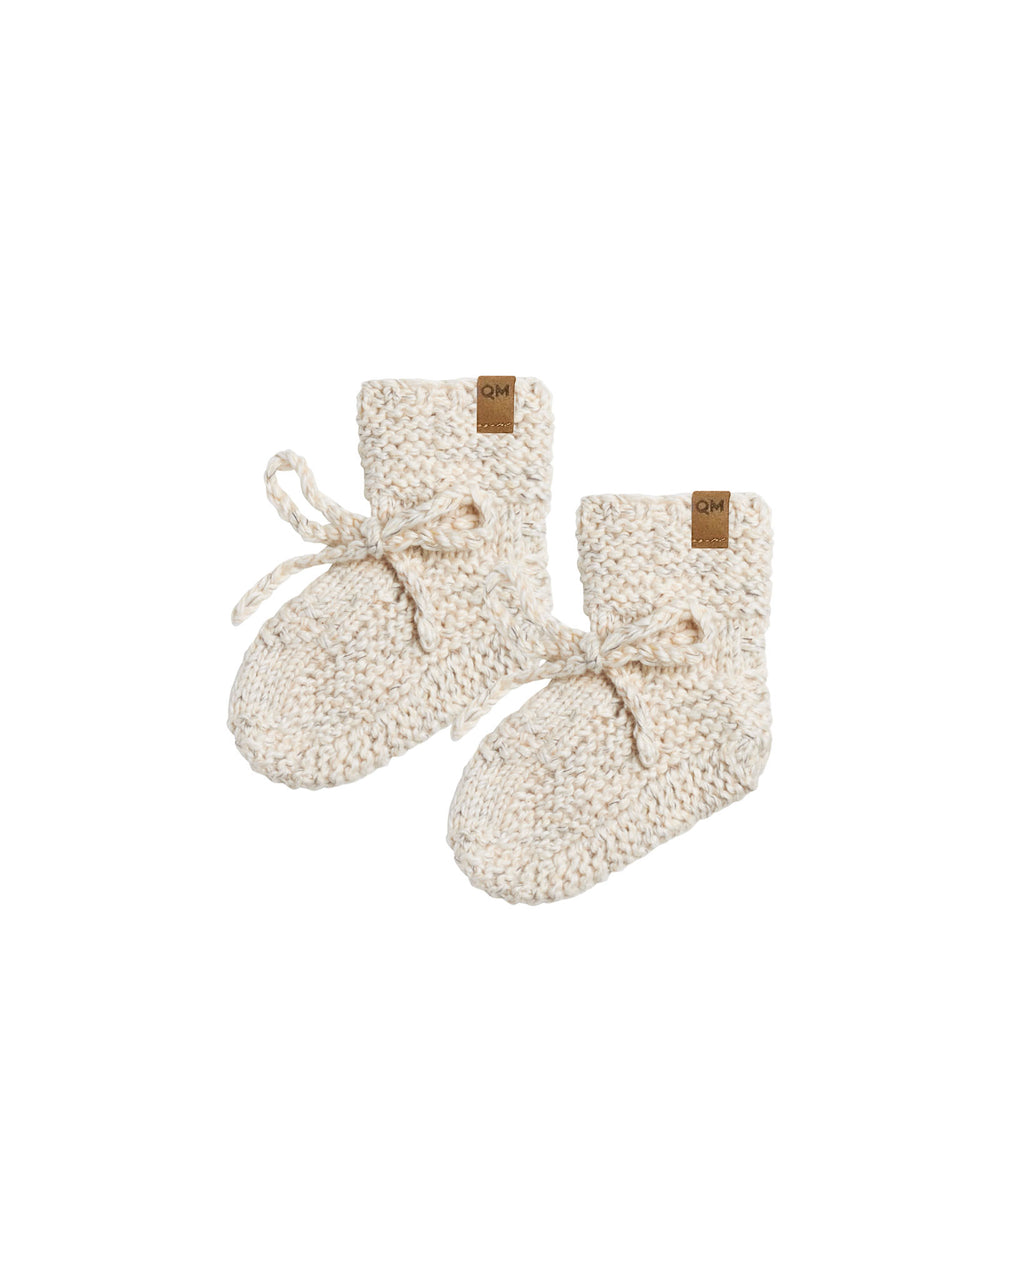 Quincy Mae Knit Booties- Natural Speckled